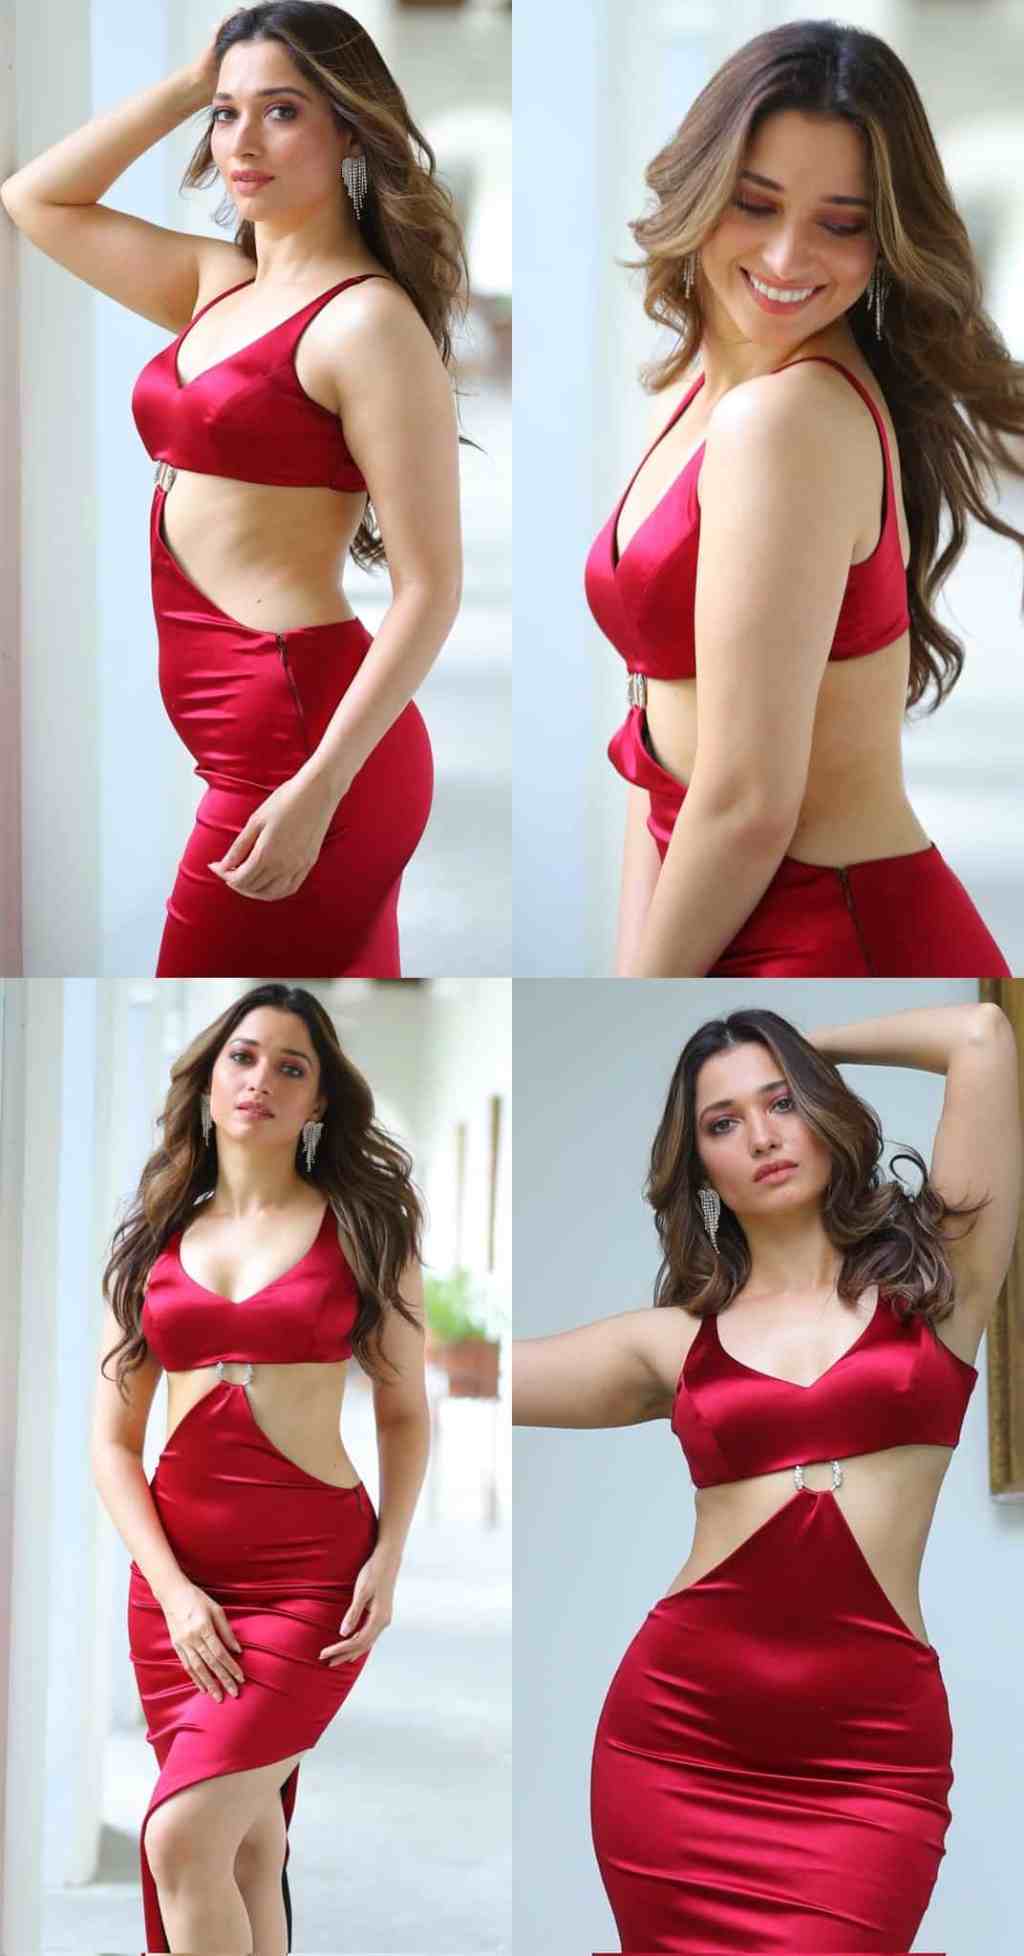 Tamannaah Bhatia looks drop dead gorgeous in this RED outfit